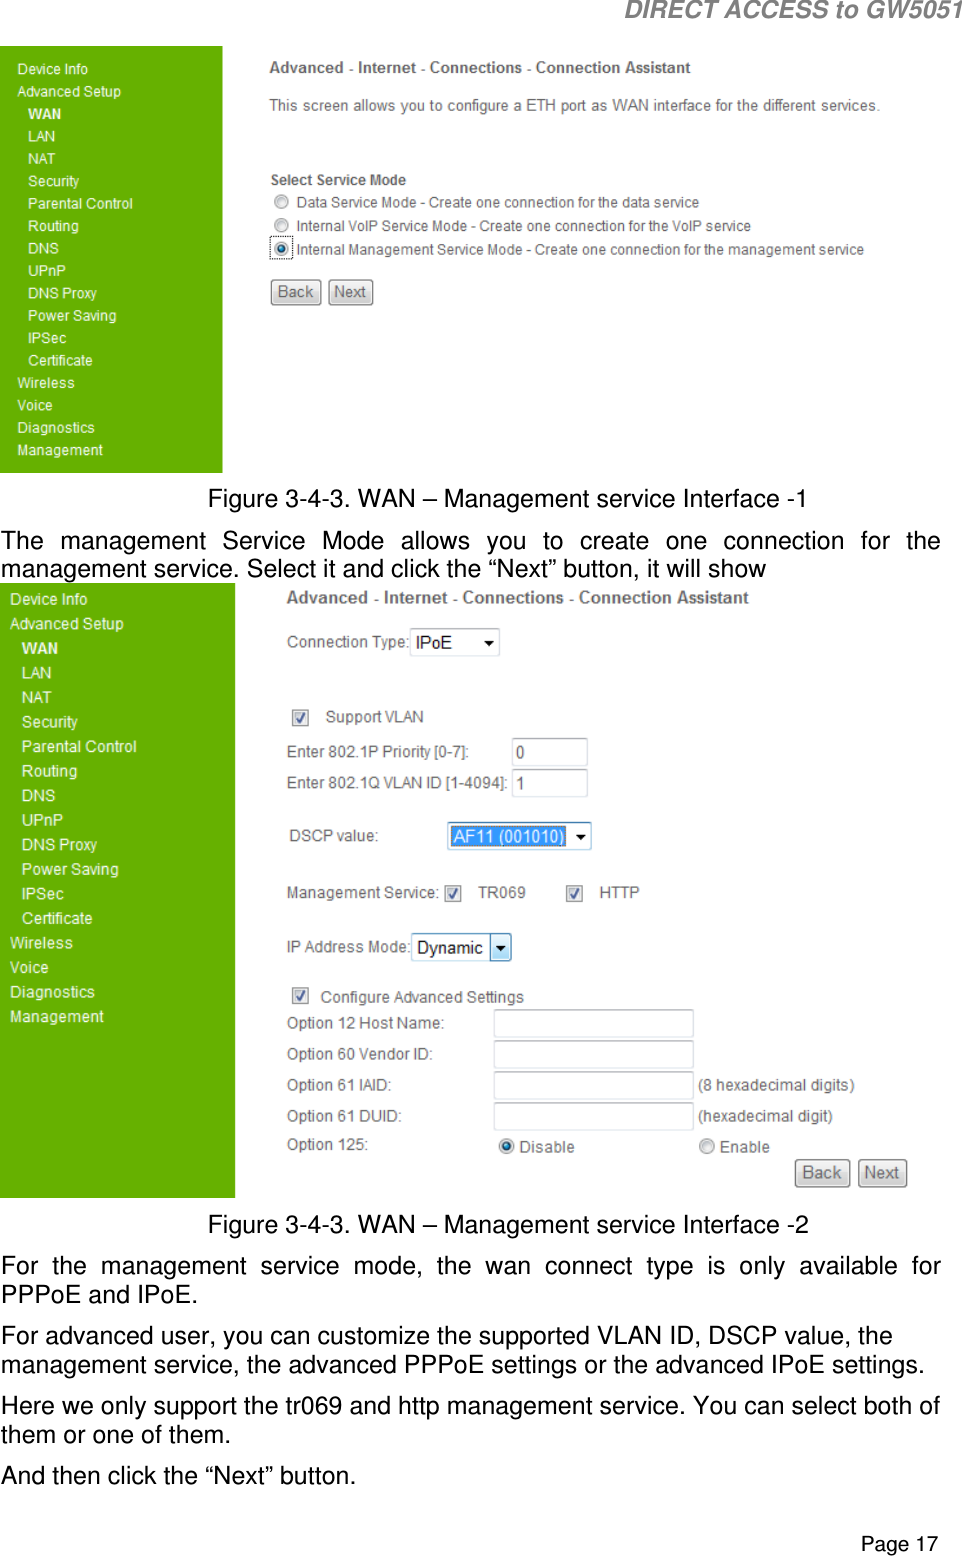                                                                                                                                                                                                                           DIRECT ACCESS to GW5051    Page 17  Figure 3-4-3. WAN – Management service Interface -1 The  management  Service  Mode  allows  you  to  create  one  connection  for  the management service. Select it and click the “Next” button, it will show  Figure 3-4-3. WAN – Management service Interface -2 For  the  management  service  mode,  the  wan  connect  type  is  only  available  for PPPoE and IPoE. For advanced user, you can customize the supported VLAN ID, DSCP value, the management service, the advanced PPPoE settings or the advanced IPoE settings. Here we only support the tr069 and http management service. You can select both of them or one of them. And then click the “Next” button. 